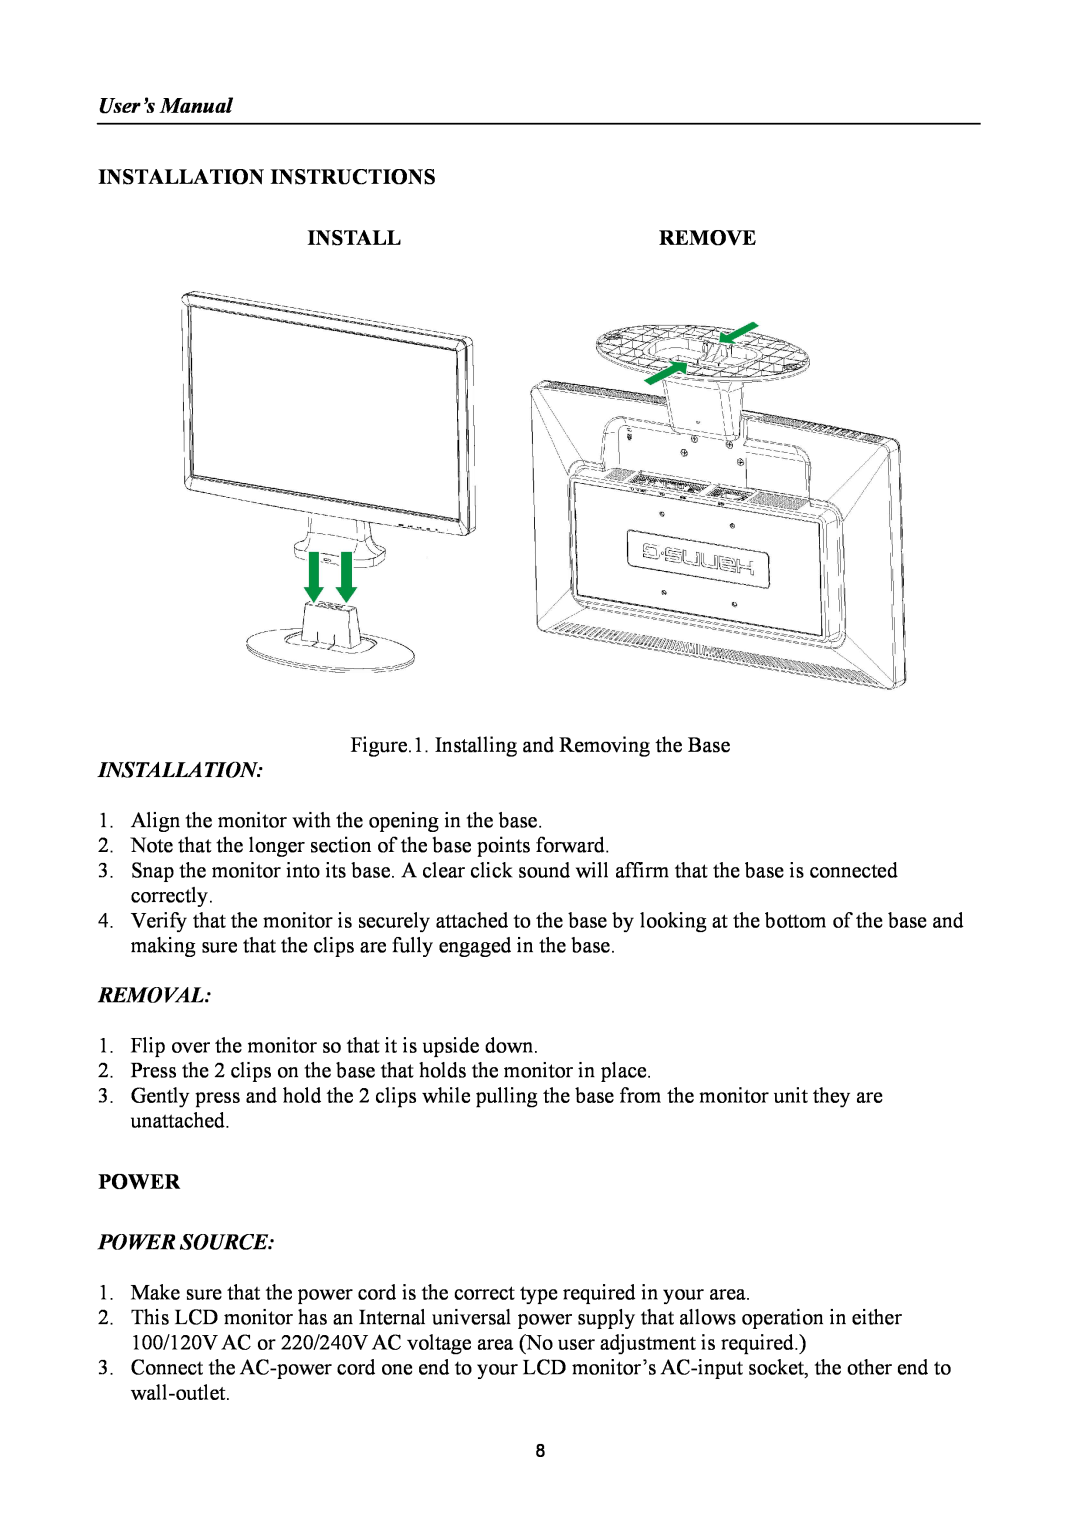 Hanns.G HH221 manual User’s Manual, Installation Instructions Installremove, Removal, Power Source 